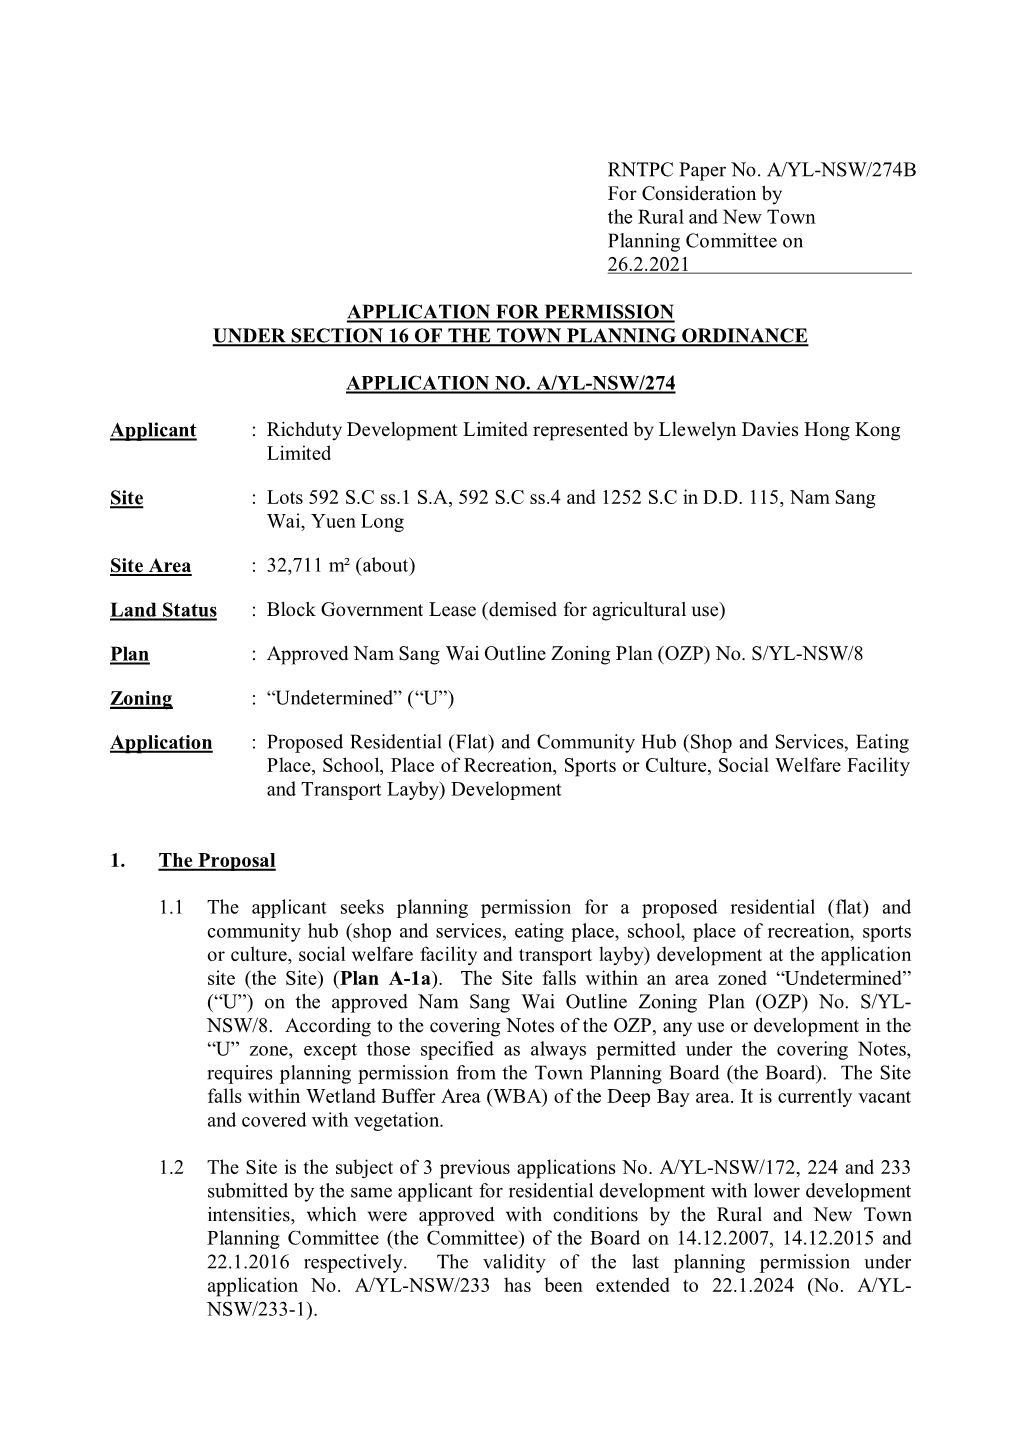 RNTPC Paper No. A/YL-NSW/274B for Consideration by the Rural and New Town Planning Committee on 26.2.2021